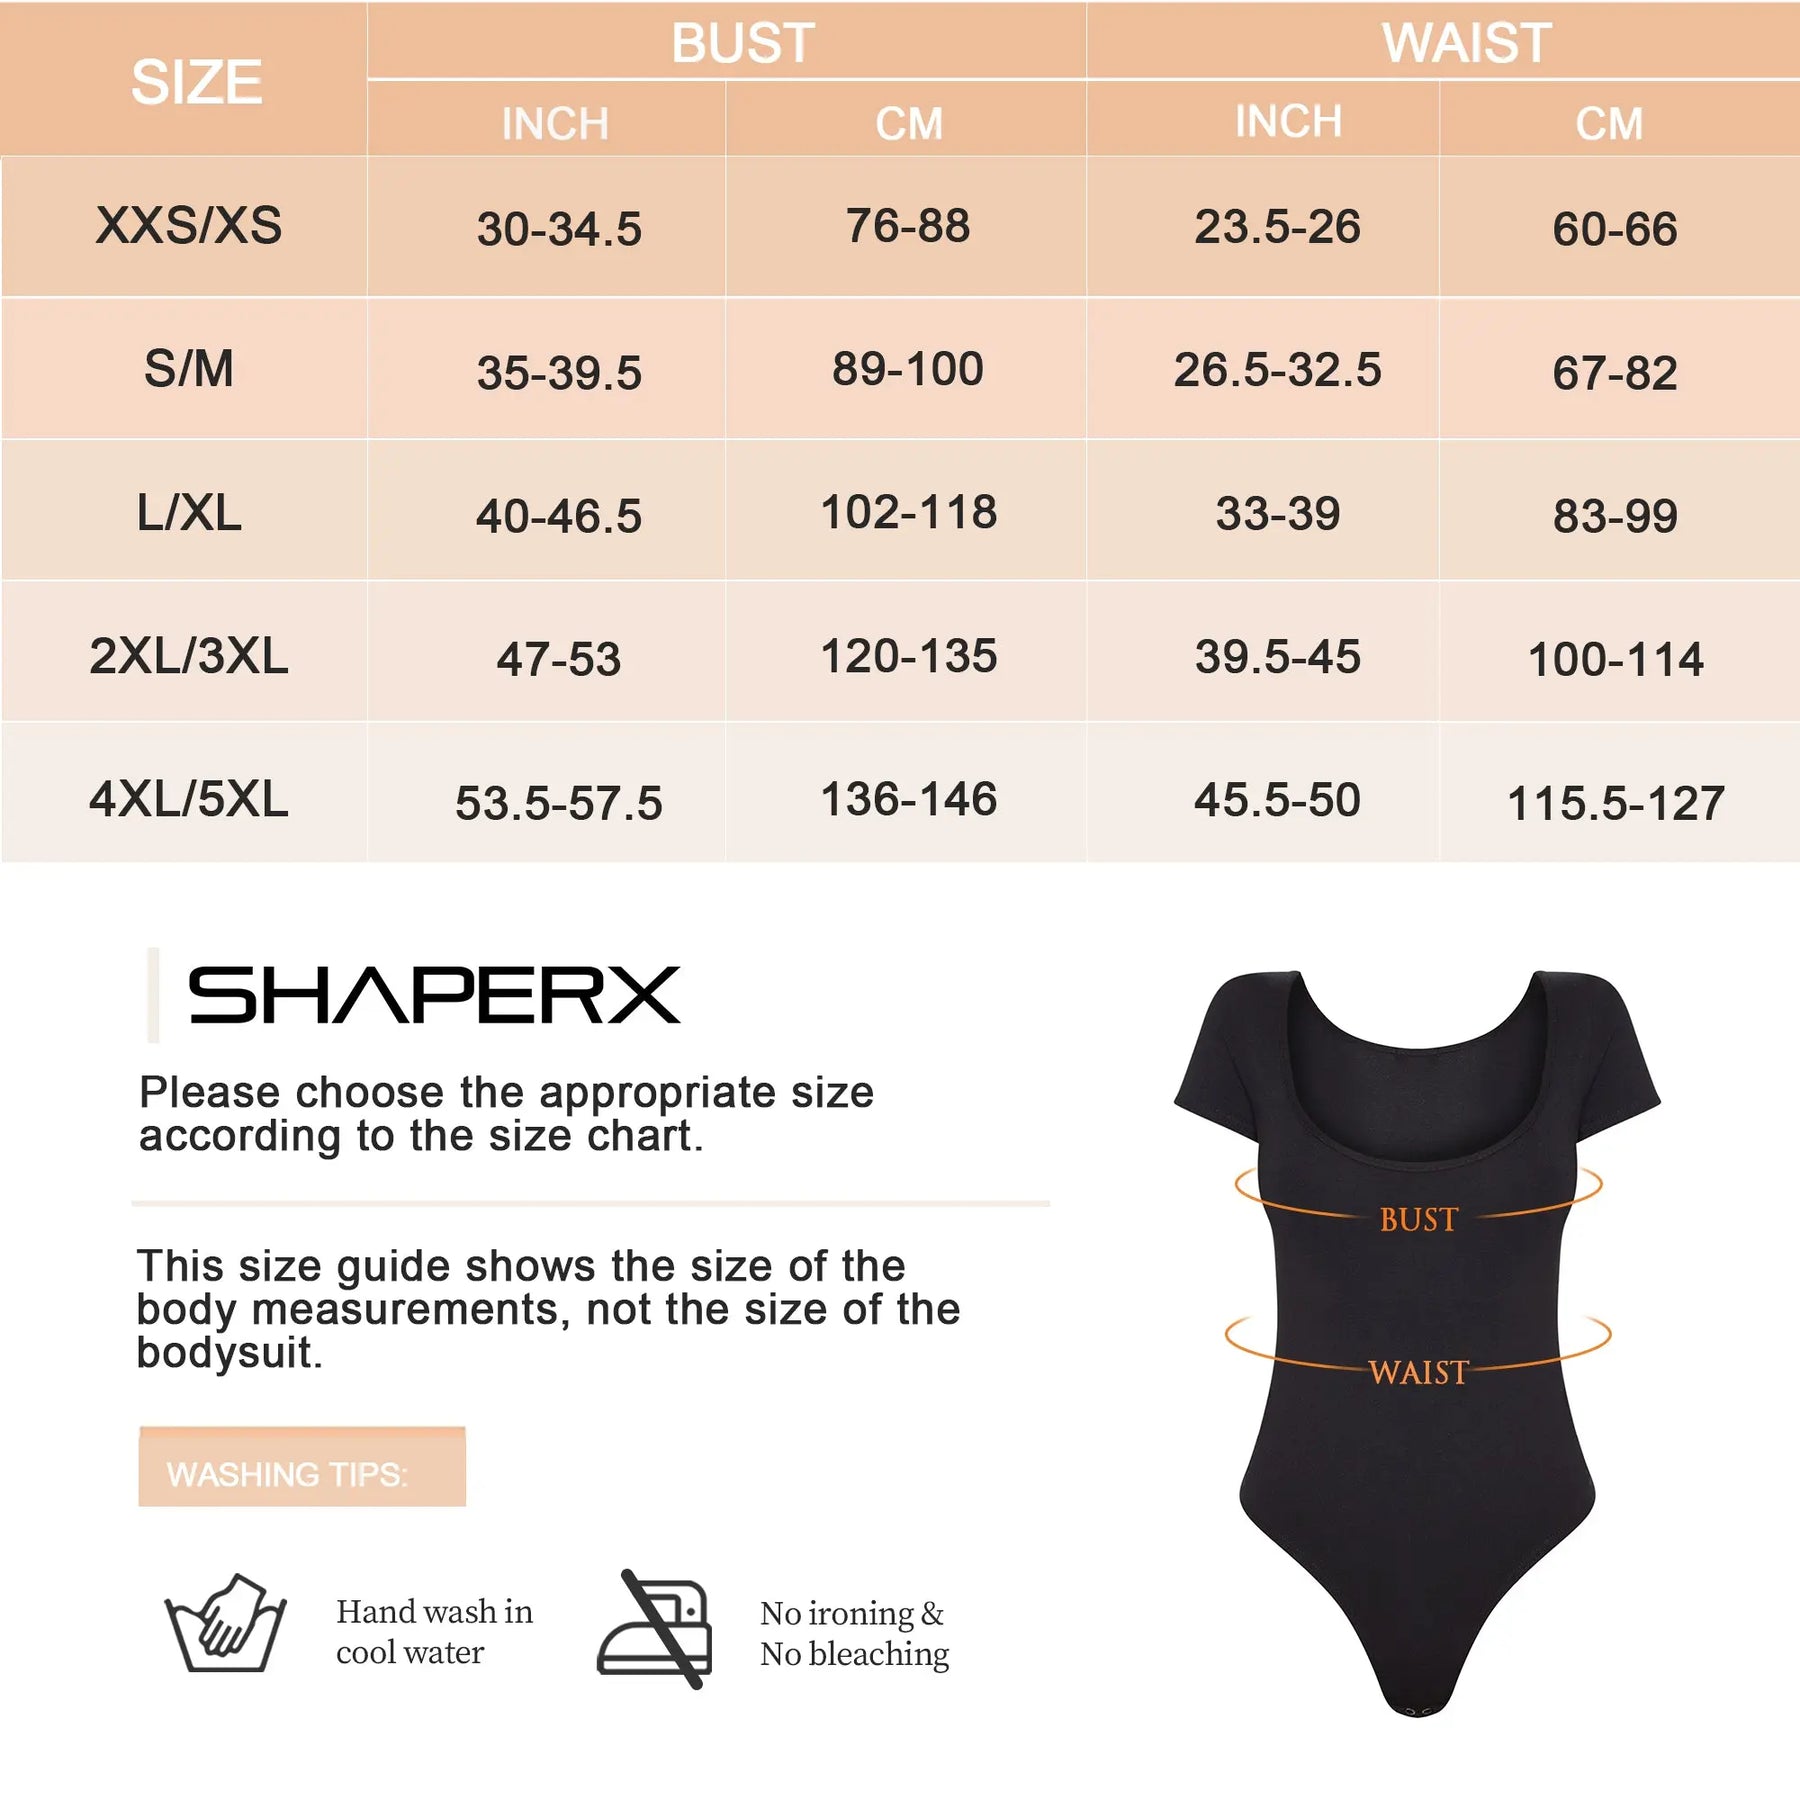 Sizing help! I bought a Shaperx from . After a little more